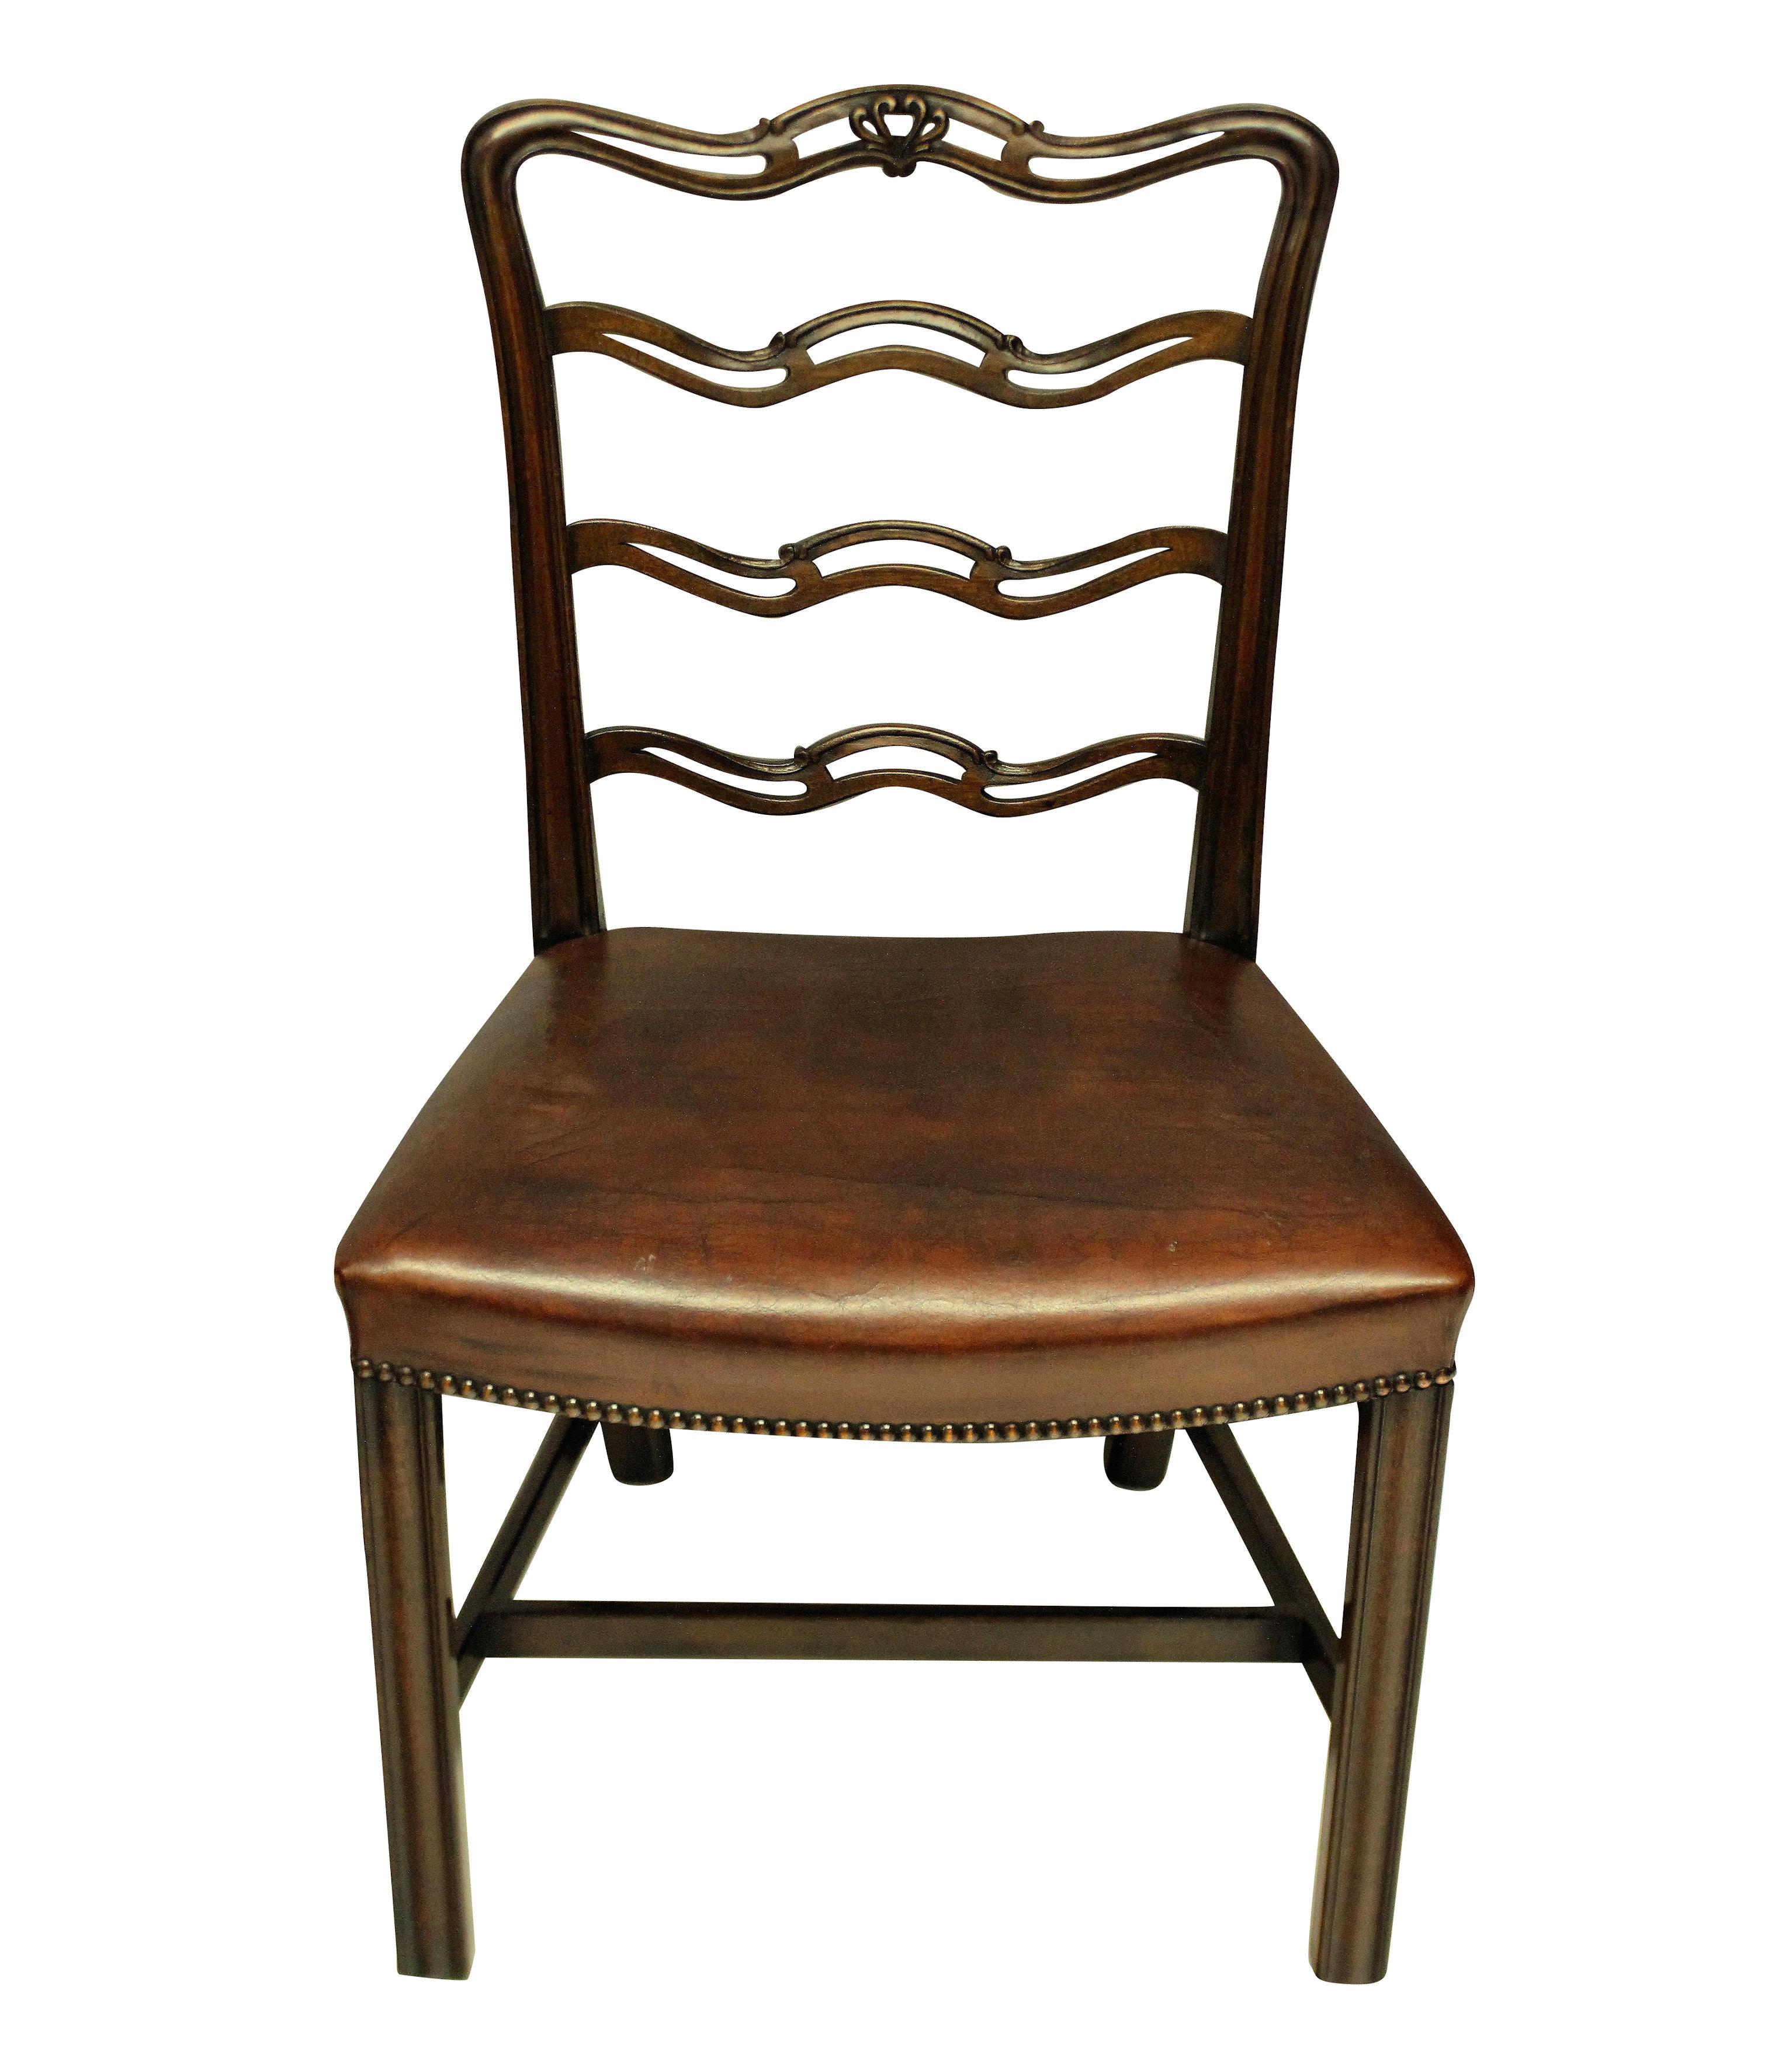 A set of six George III style mahogany ladder back dining chairs with the concave seats upholstered in leather with stud detail.